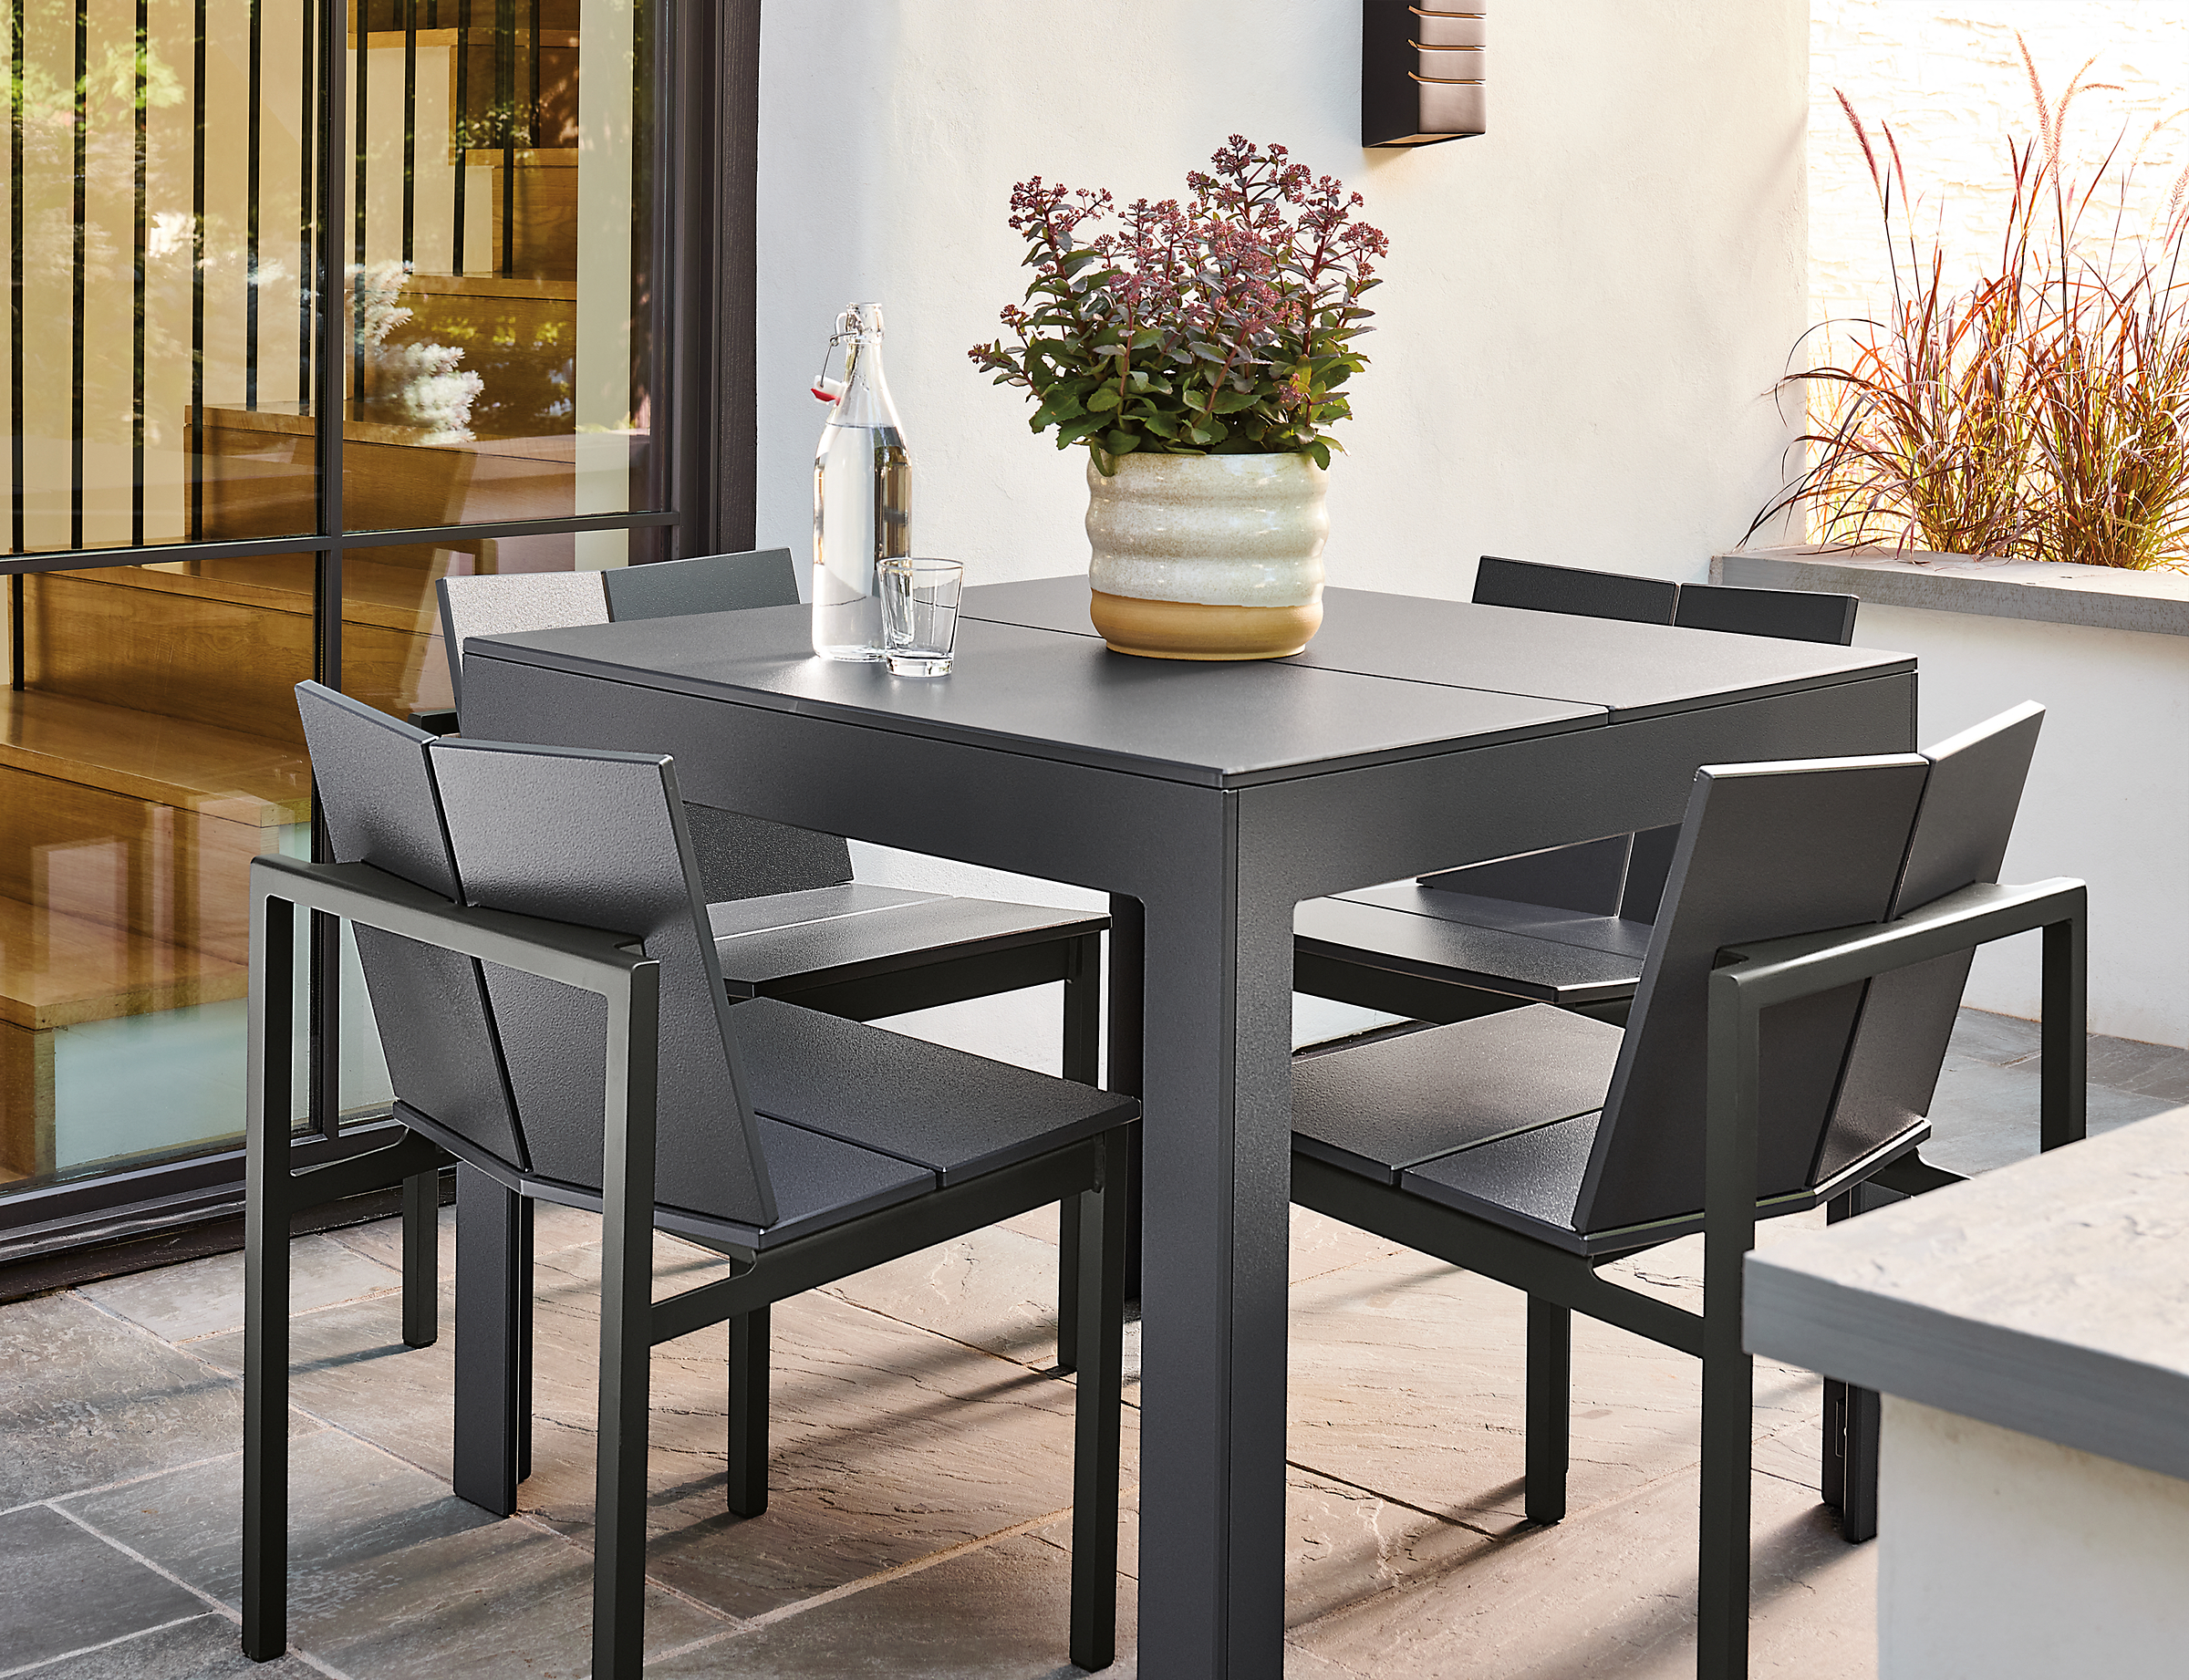 Outdoor space with henry table in grey, mattix side chairs, elias planter.